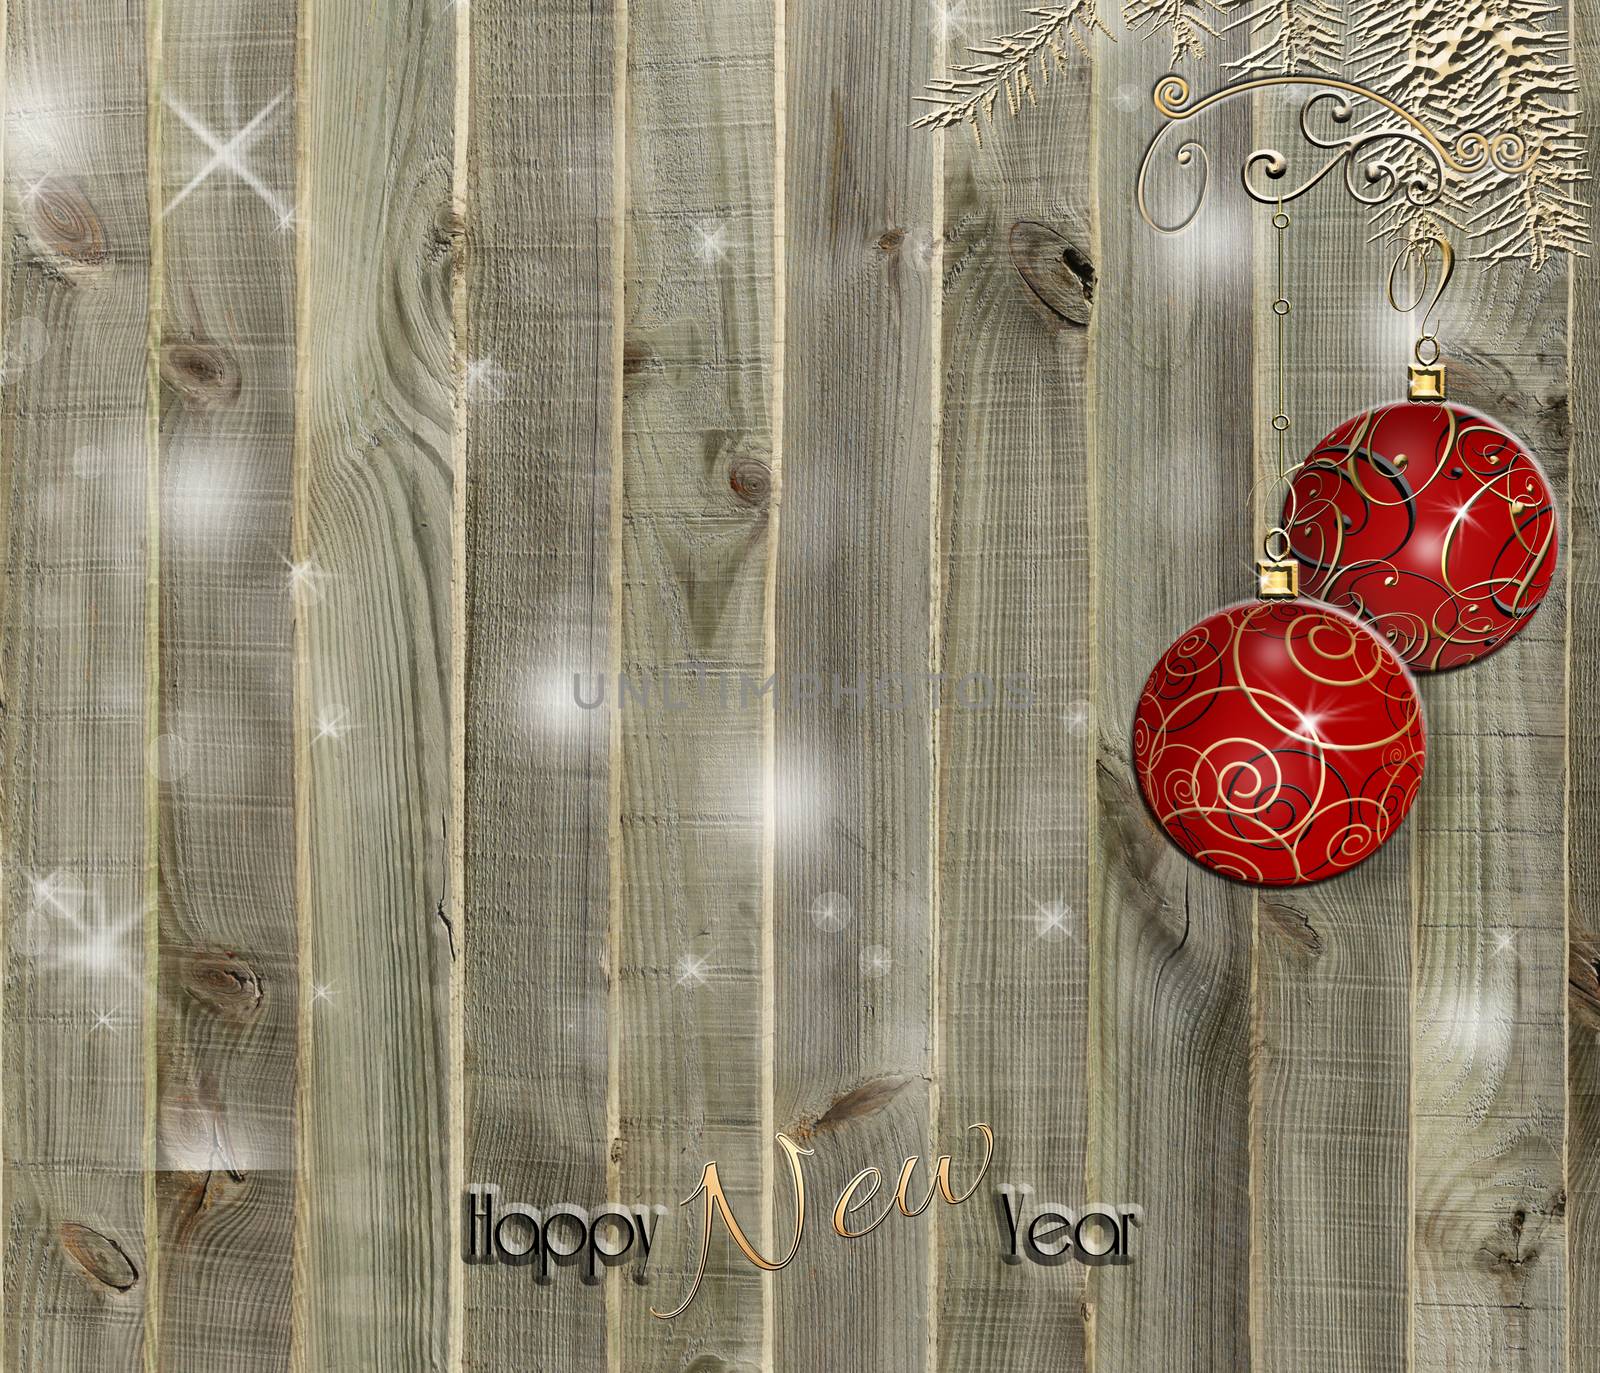 Christmas Decoration red baubles, gold fir branches Over Wooden Background. Text Happy New Year. For card, invitation, menu, mock up, design. Copy space. 3D illustration